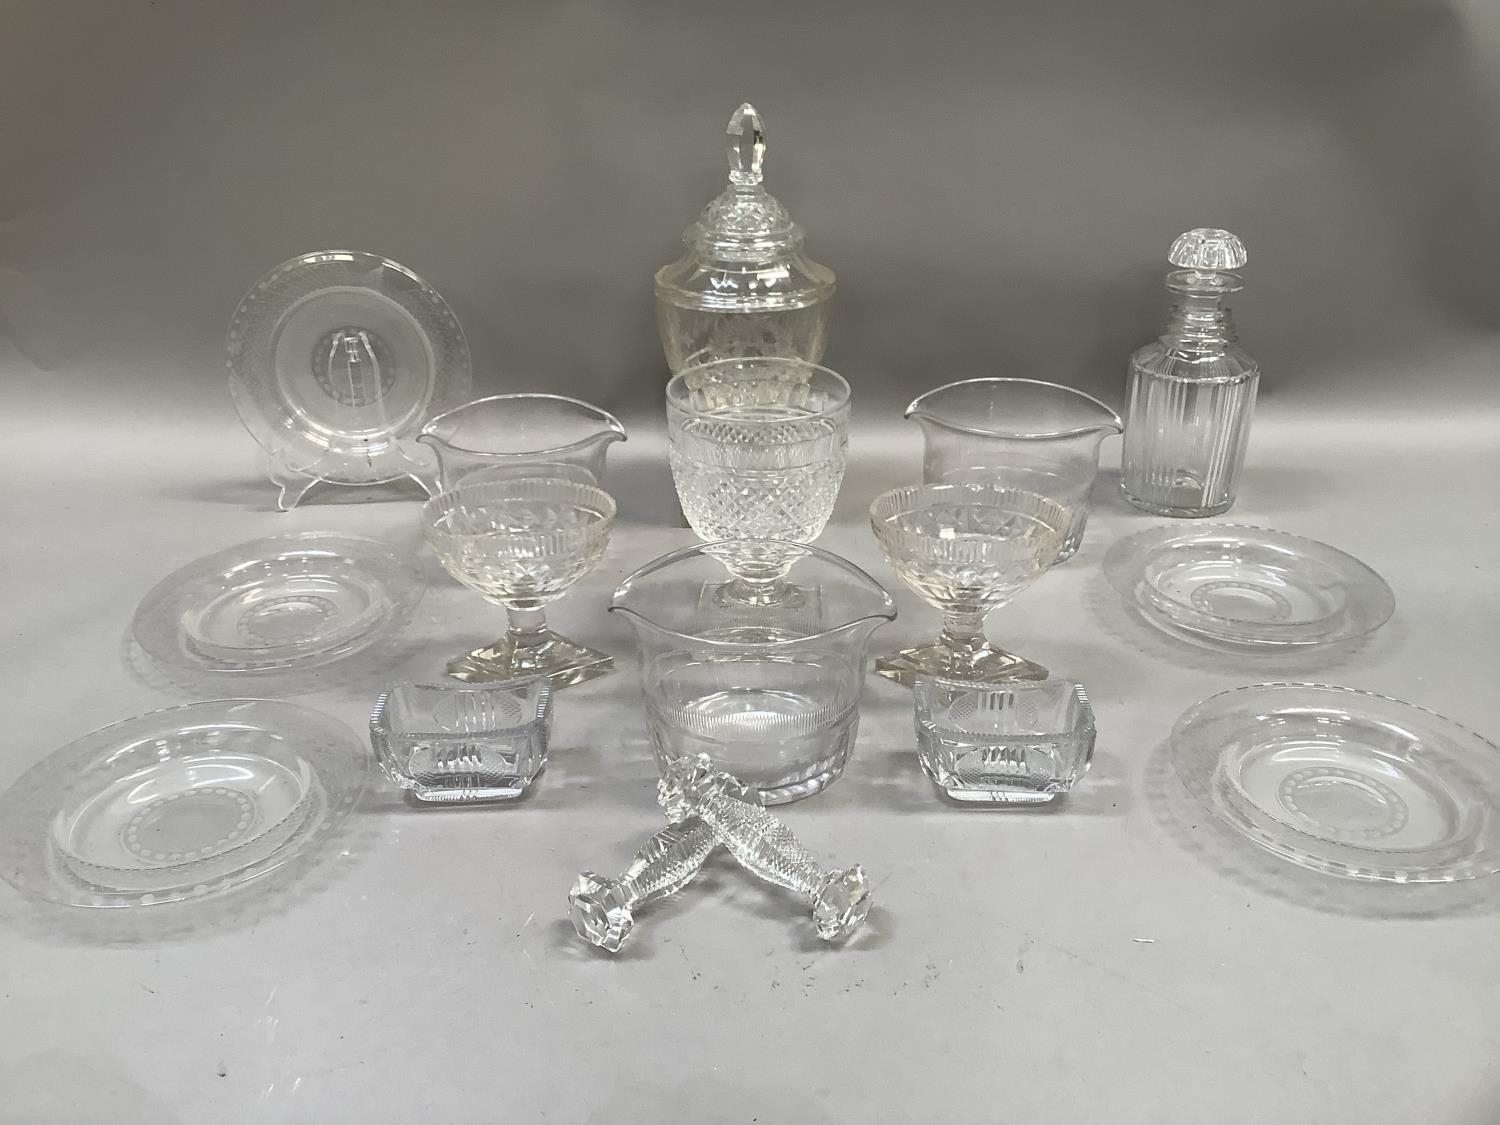 A set of three late 18th/early 19th century glass rinsers of panel cut, a pair of pedestal salts, - Image 2 of 2